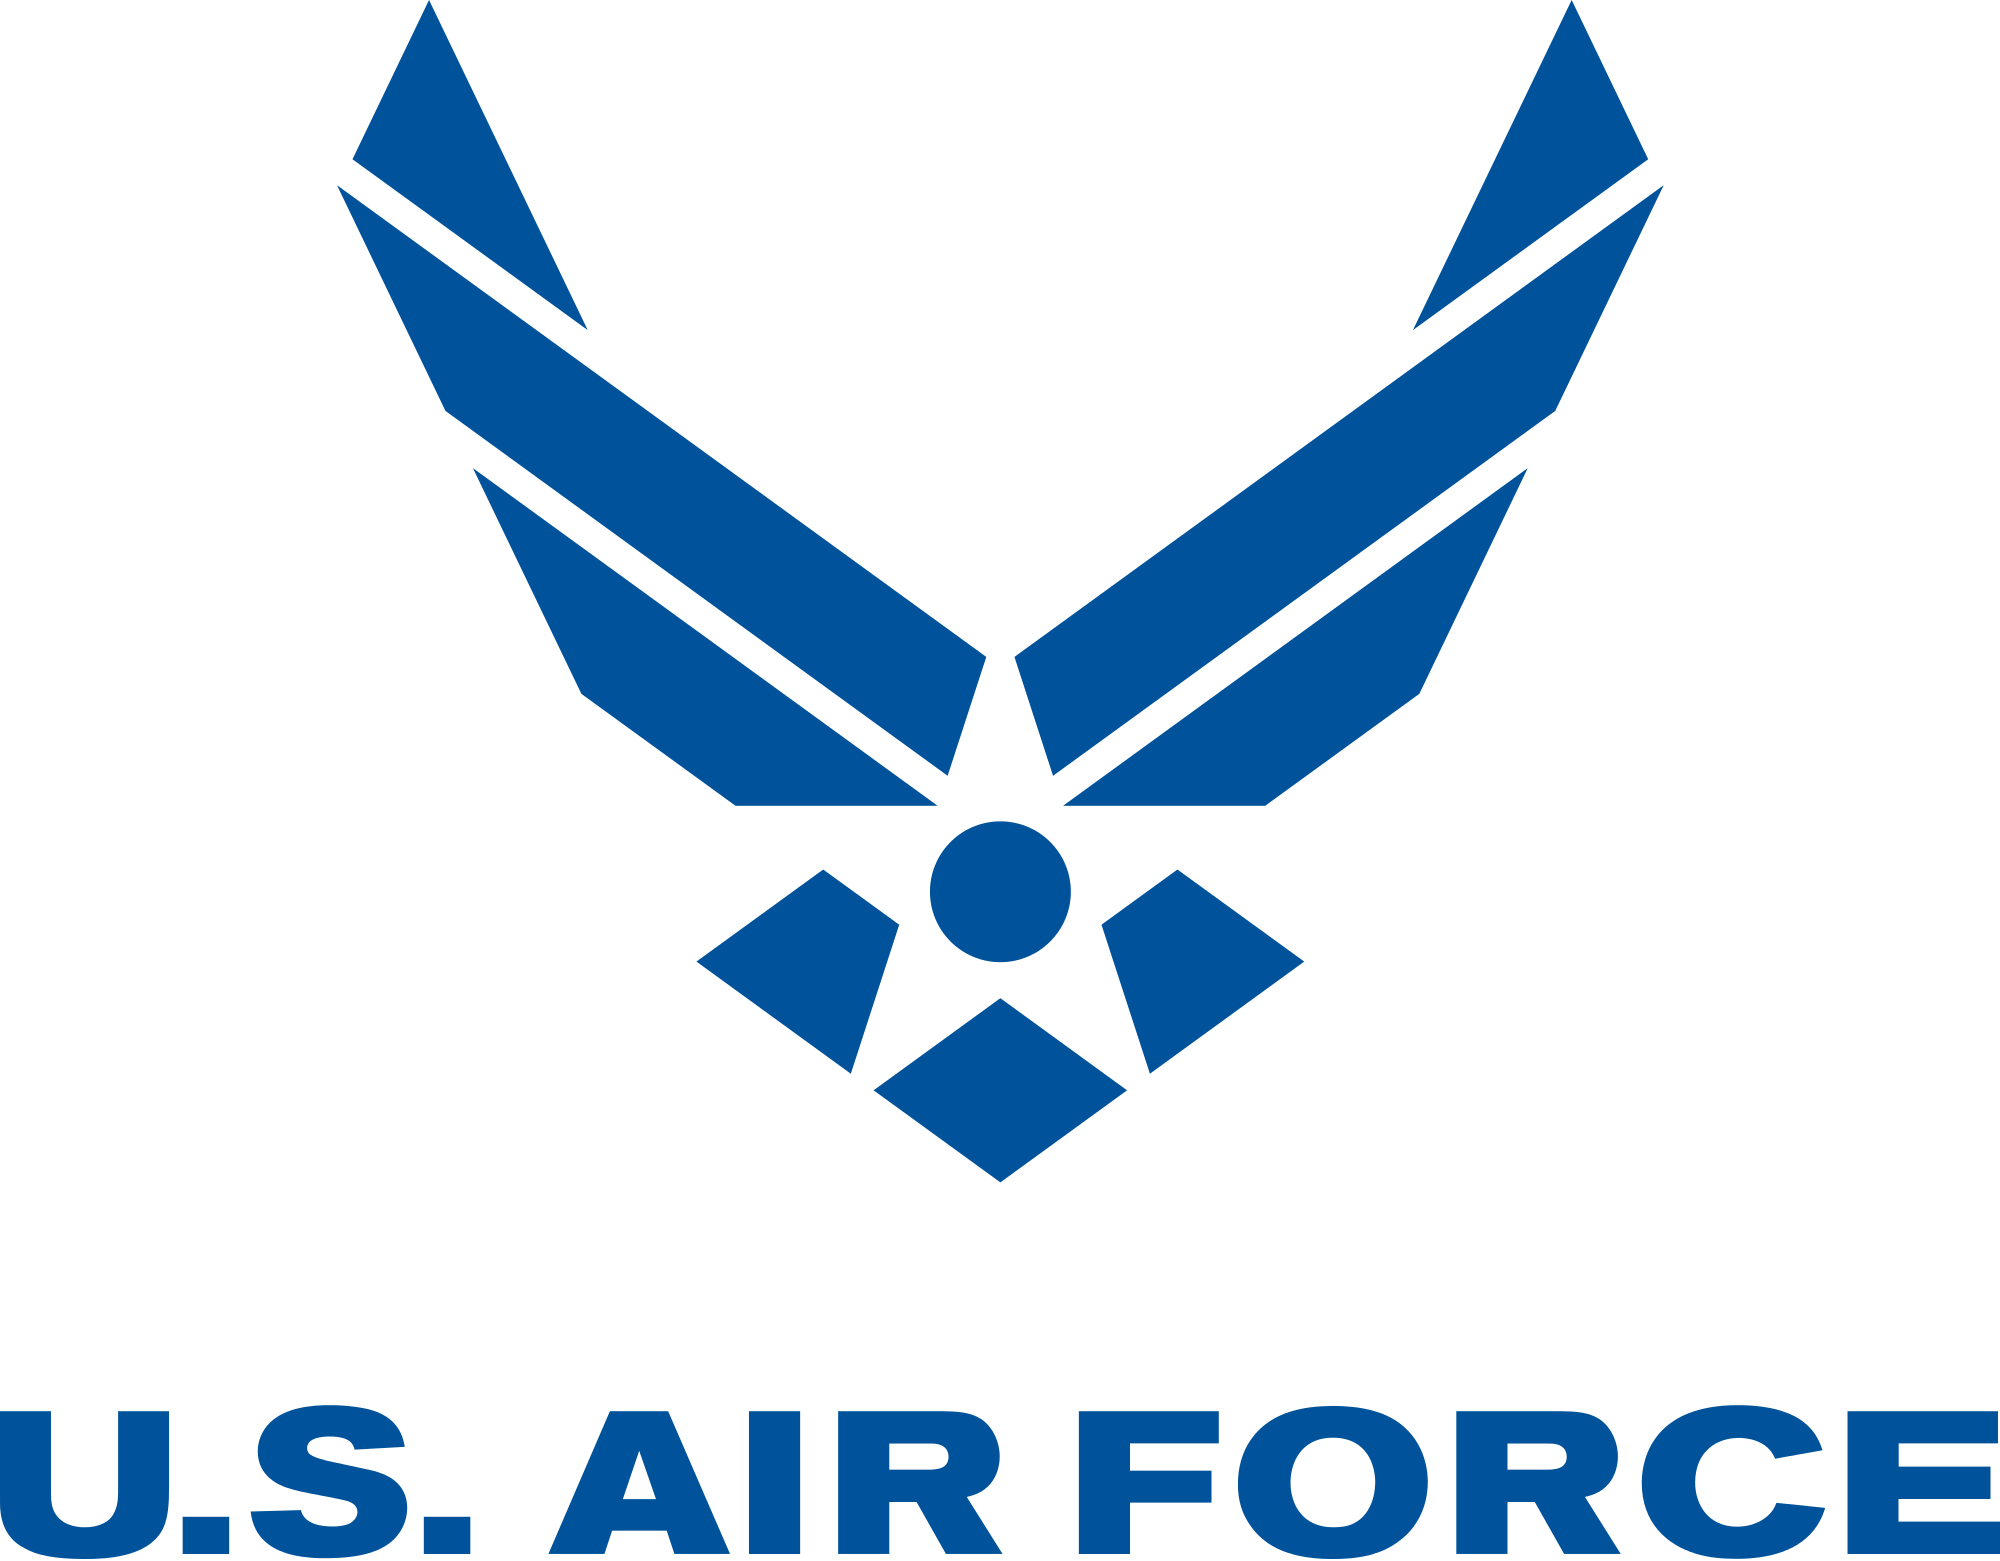 Emergency Services Physician - United States Air Force Logo (2000x1561)